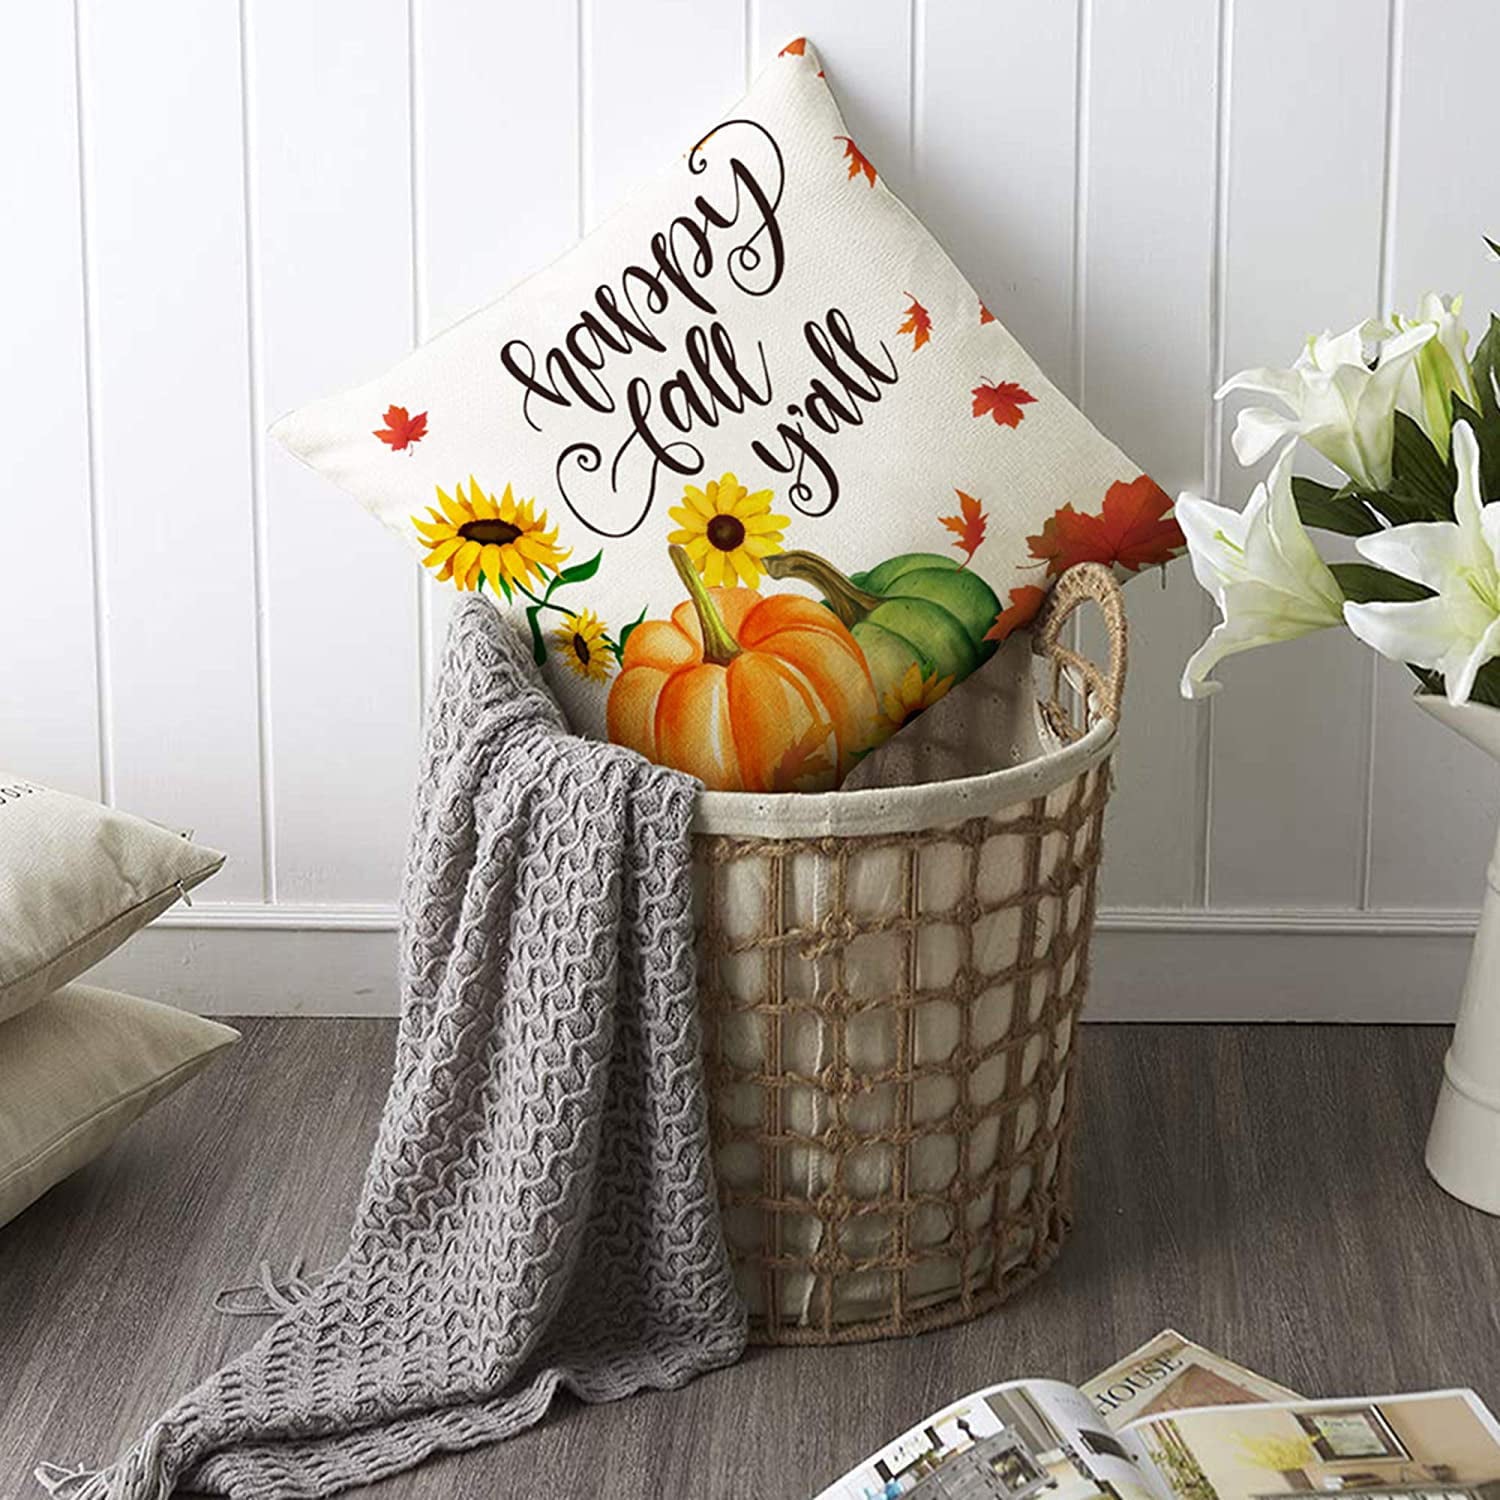 Warmth and Elegance: DecorX Pillow Covers Set of 4, Depicting Autumn's Bounty - Pumpkins & Sunflowers